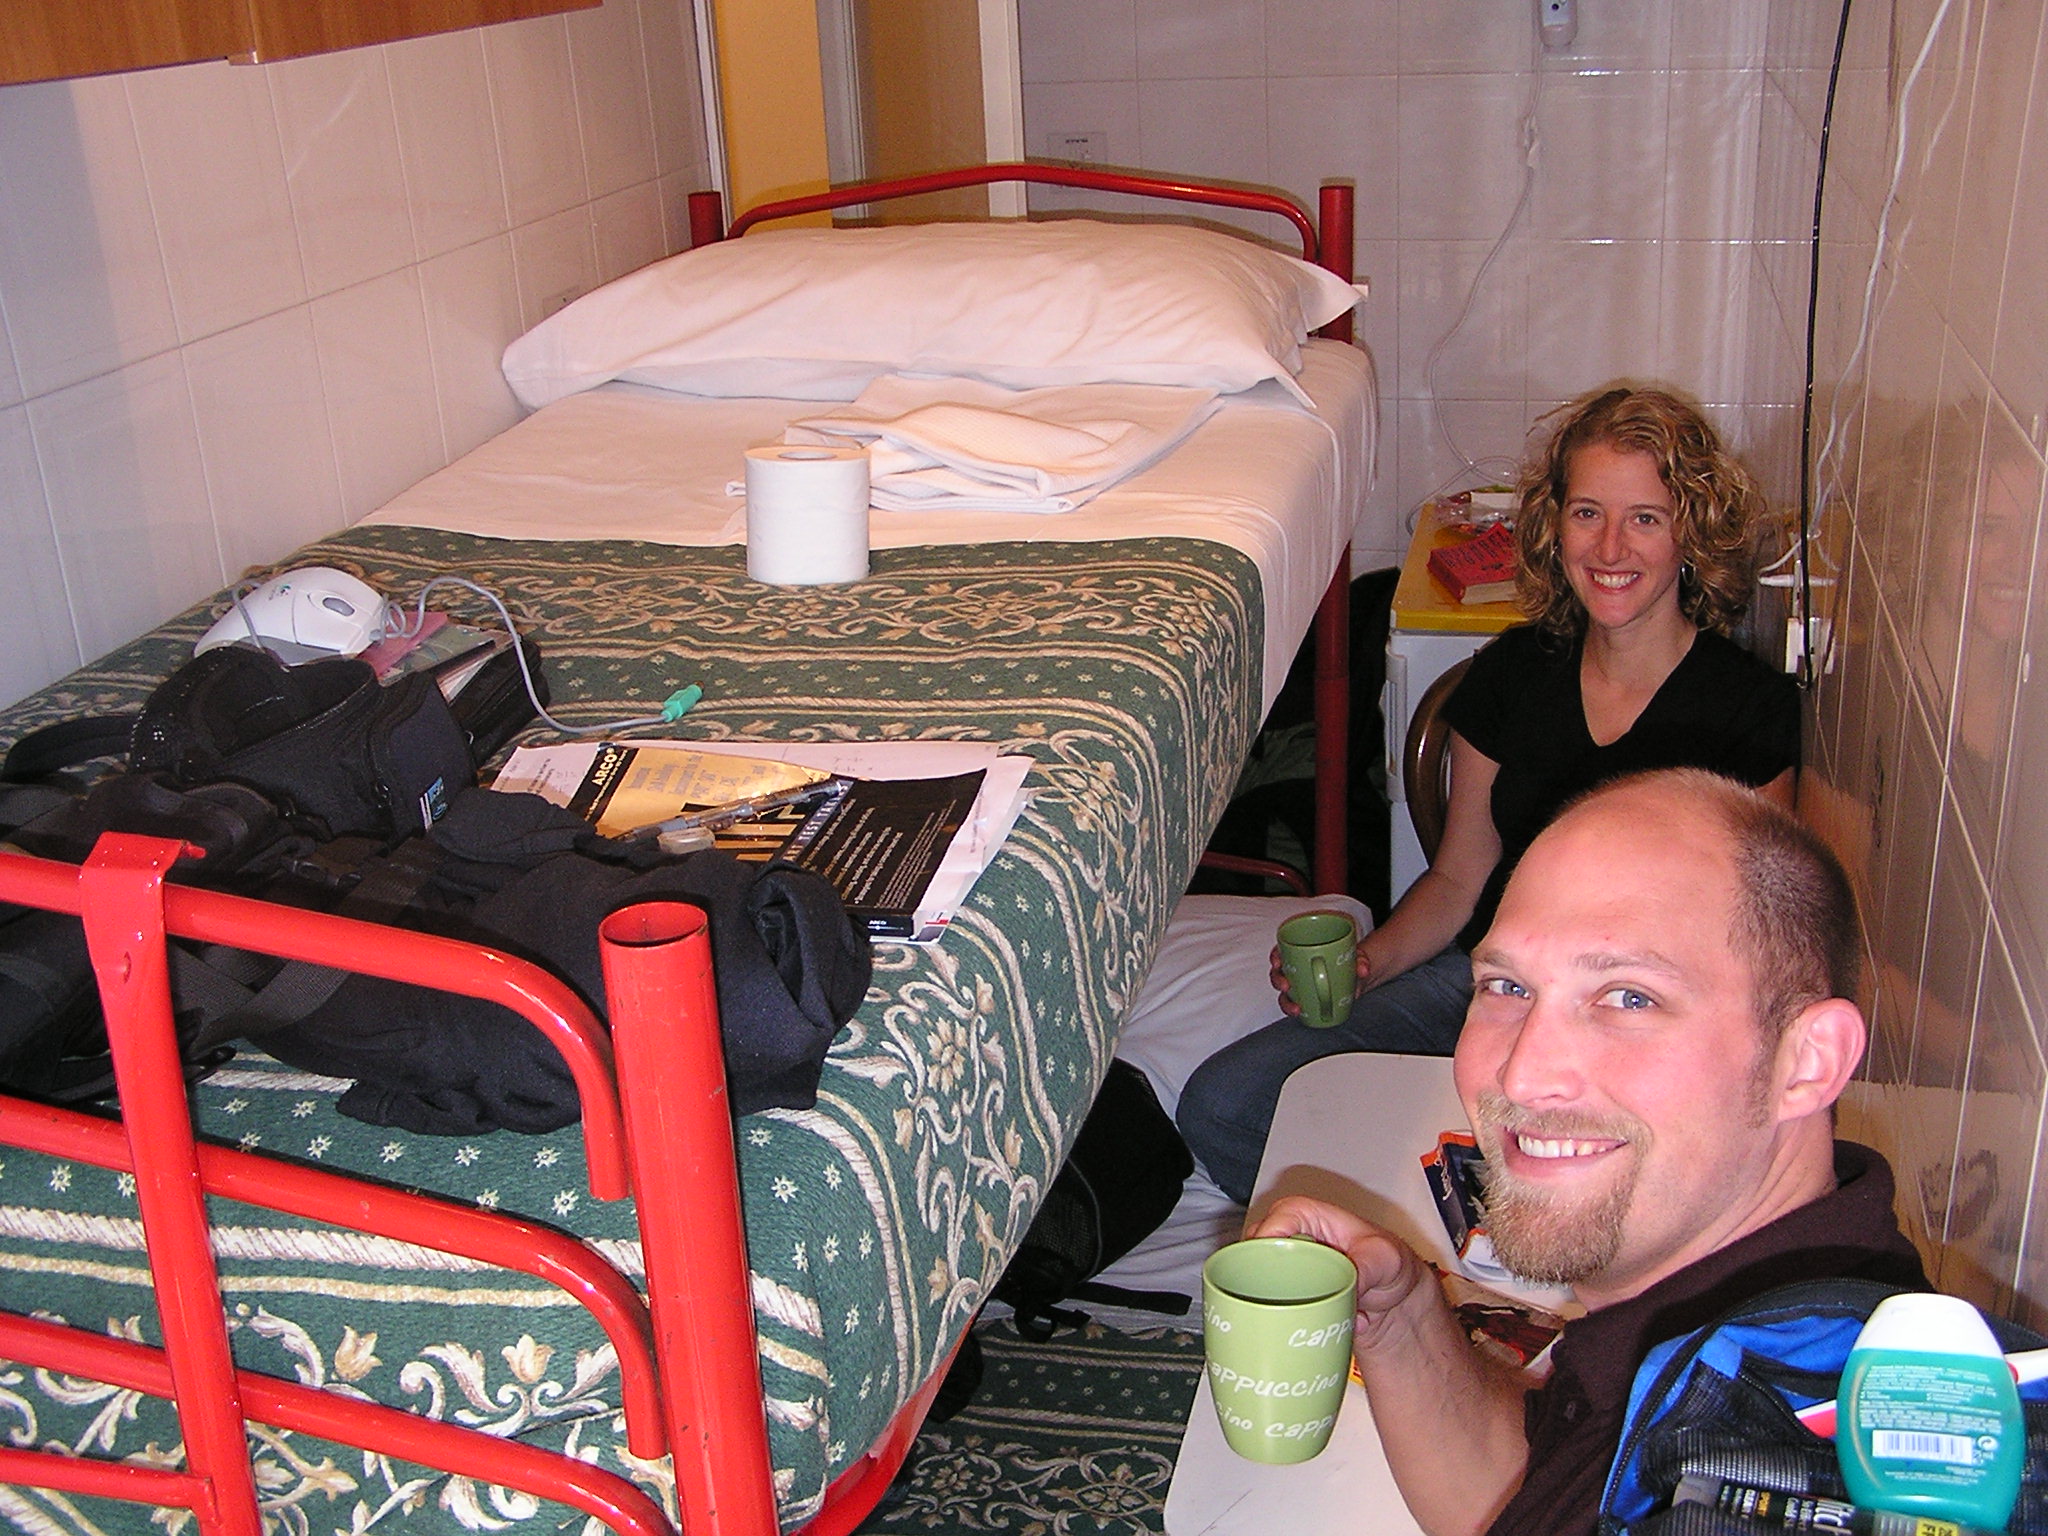 This is how we travel for so long...small rooms!